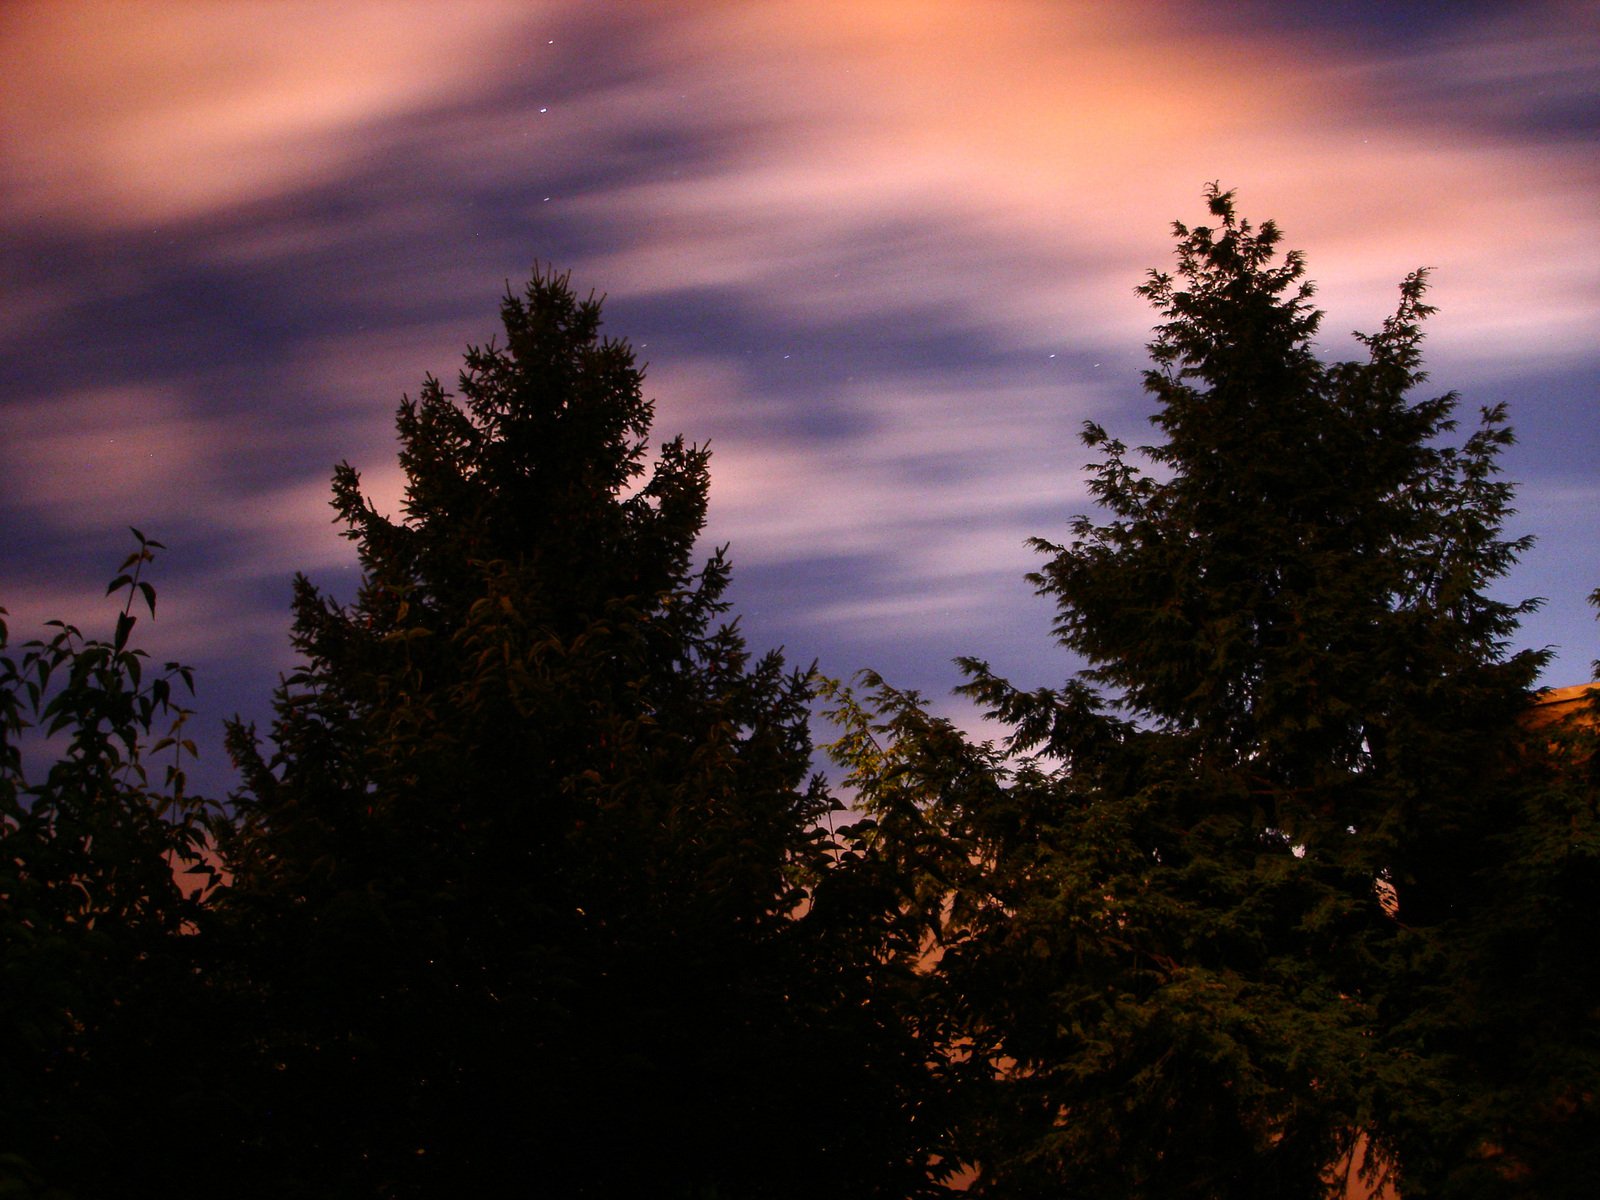 the trees at dusk are silhouetted against a sky with clouds